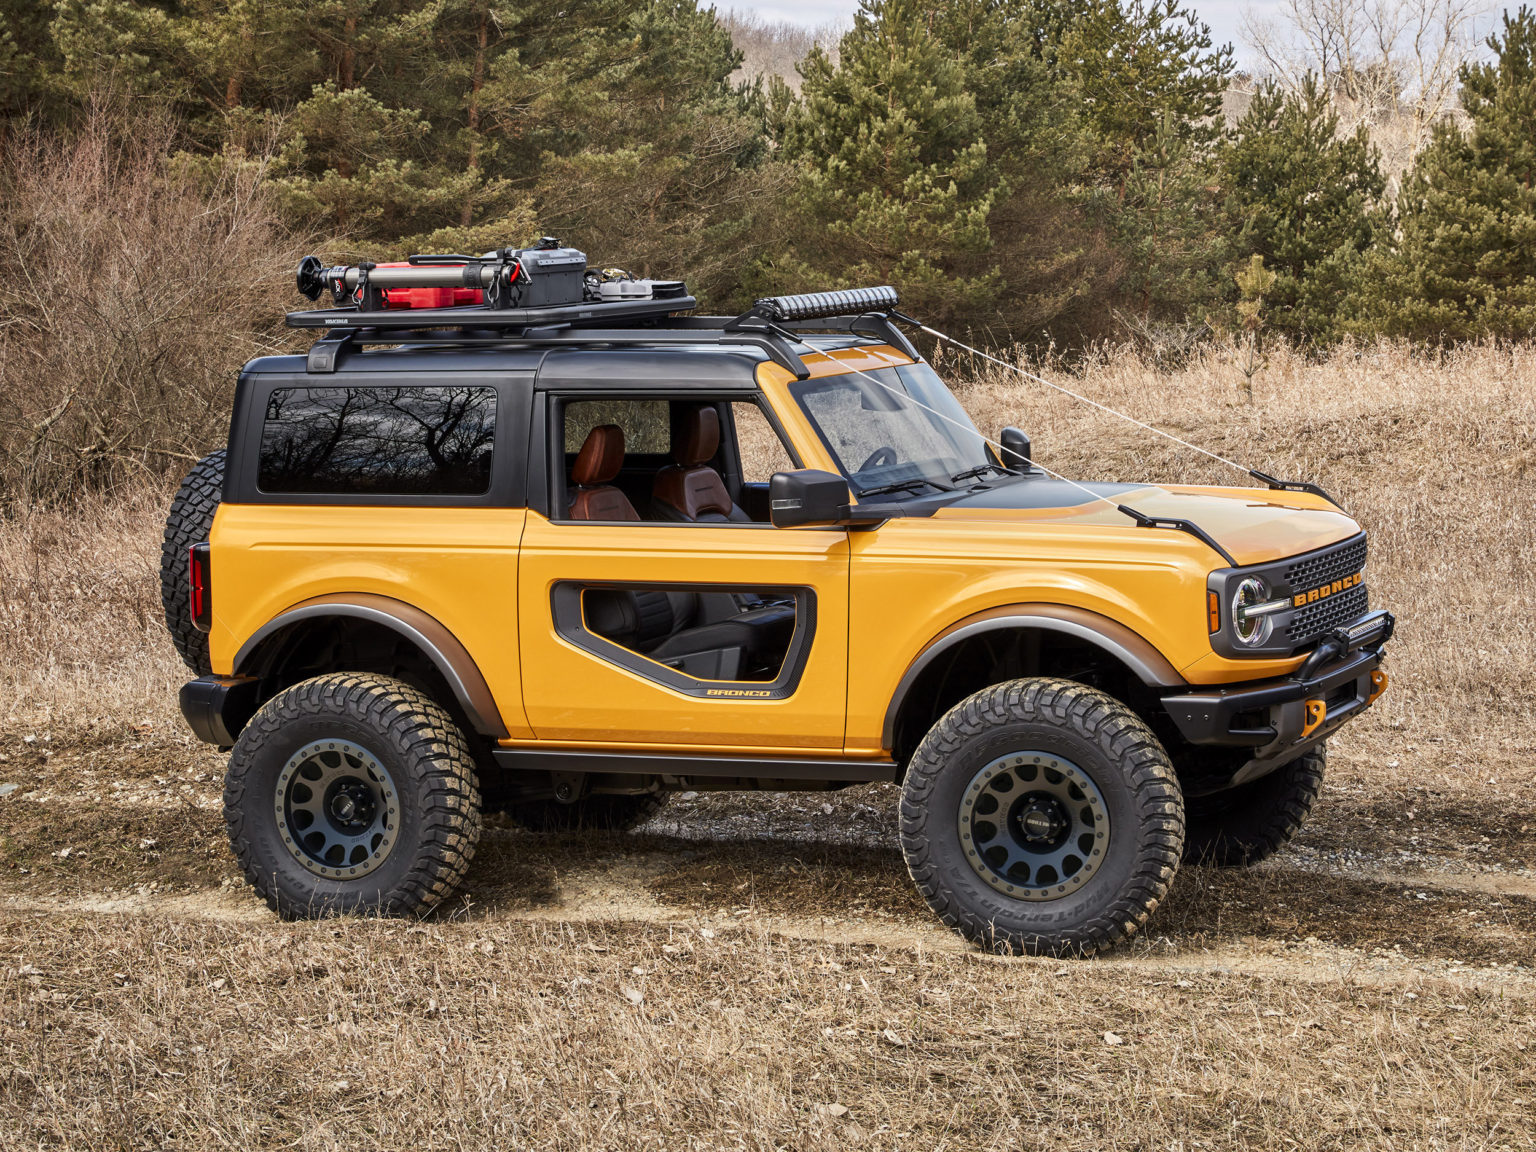 The Bronco will have over 200 accessories available from launch.